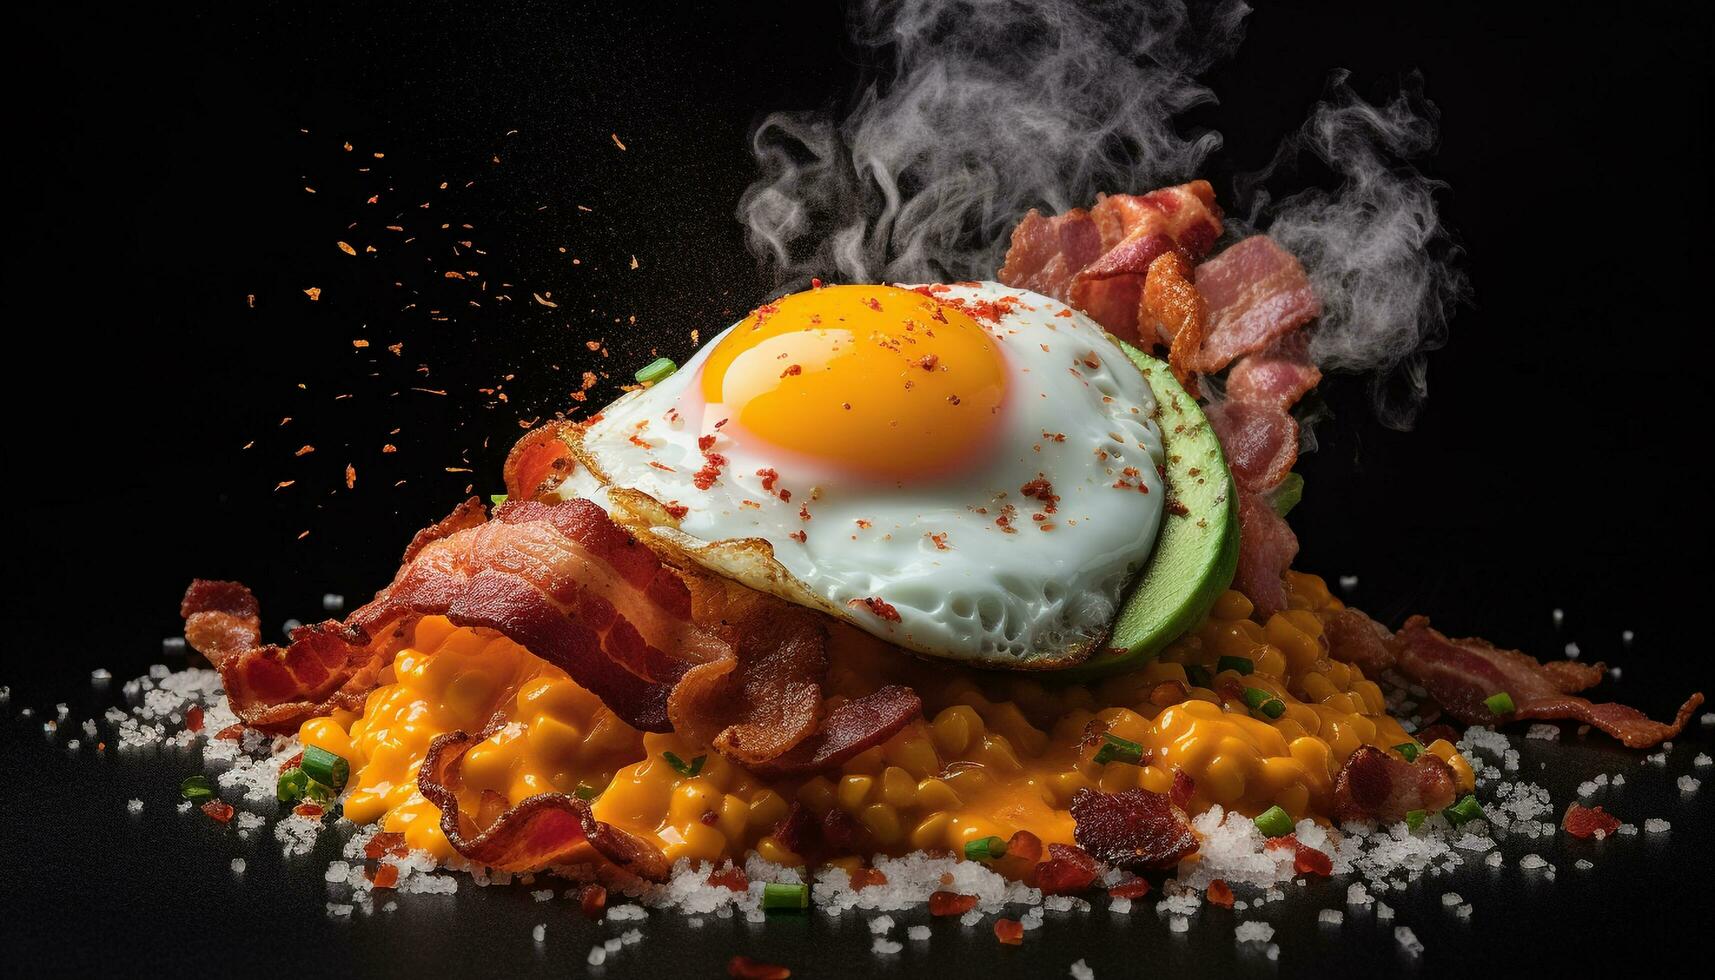 Grilled pork, bacon, and fried egg sandwich generated by AI photo